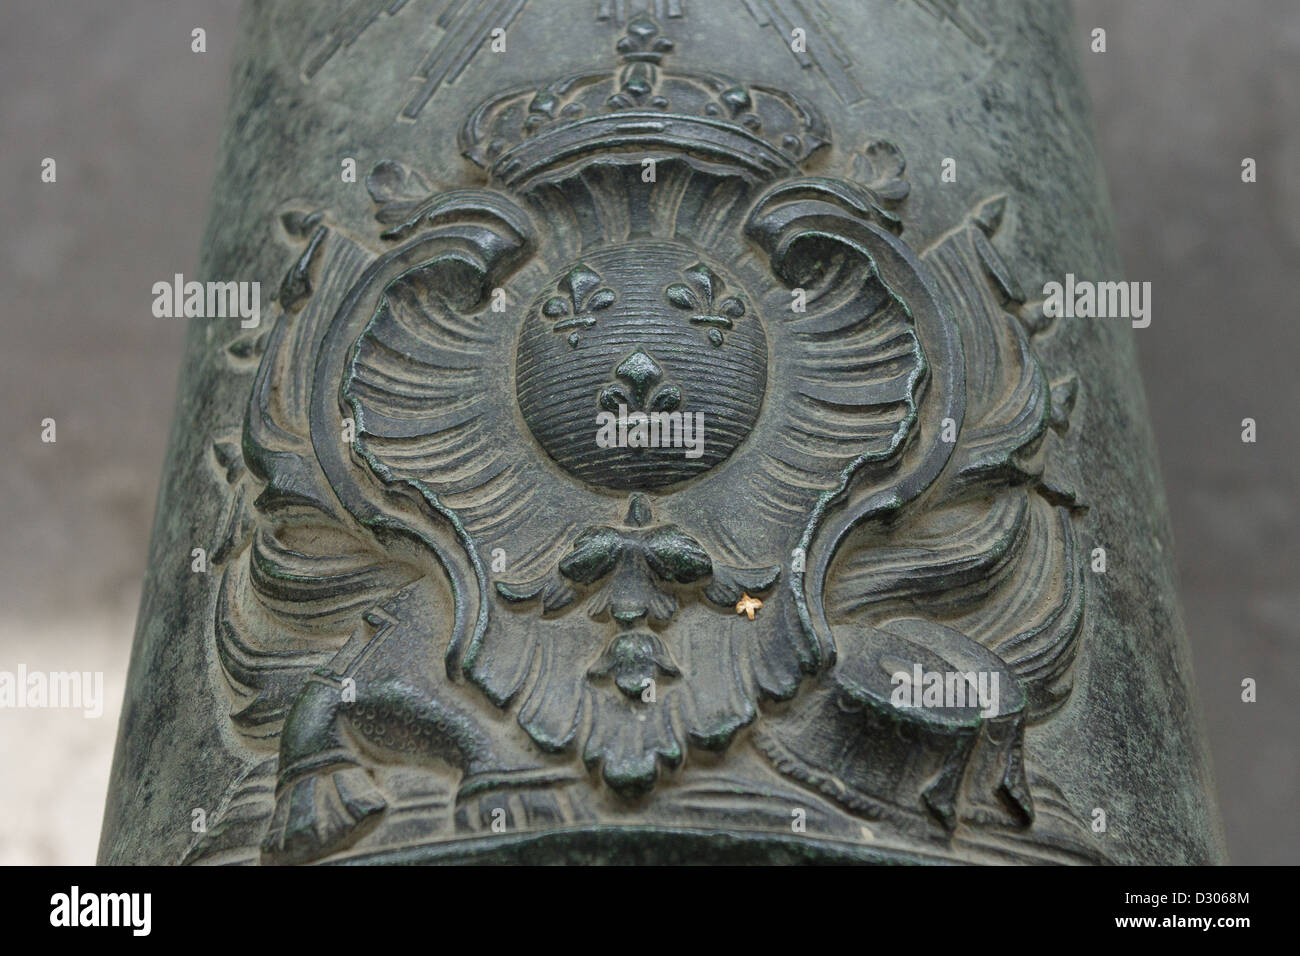 French coat of arms of King Louis XIV (Sun King) on the old bronze cannon. Stock Photo